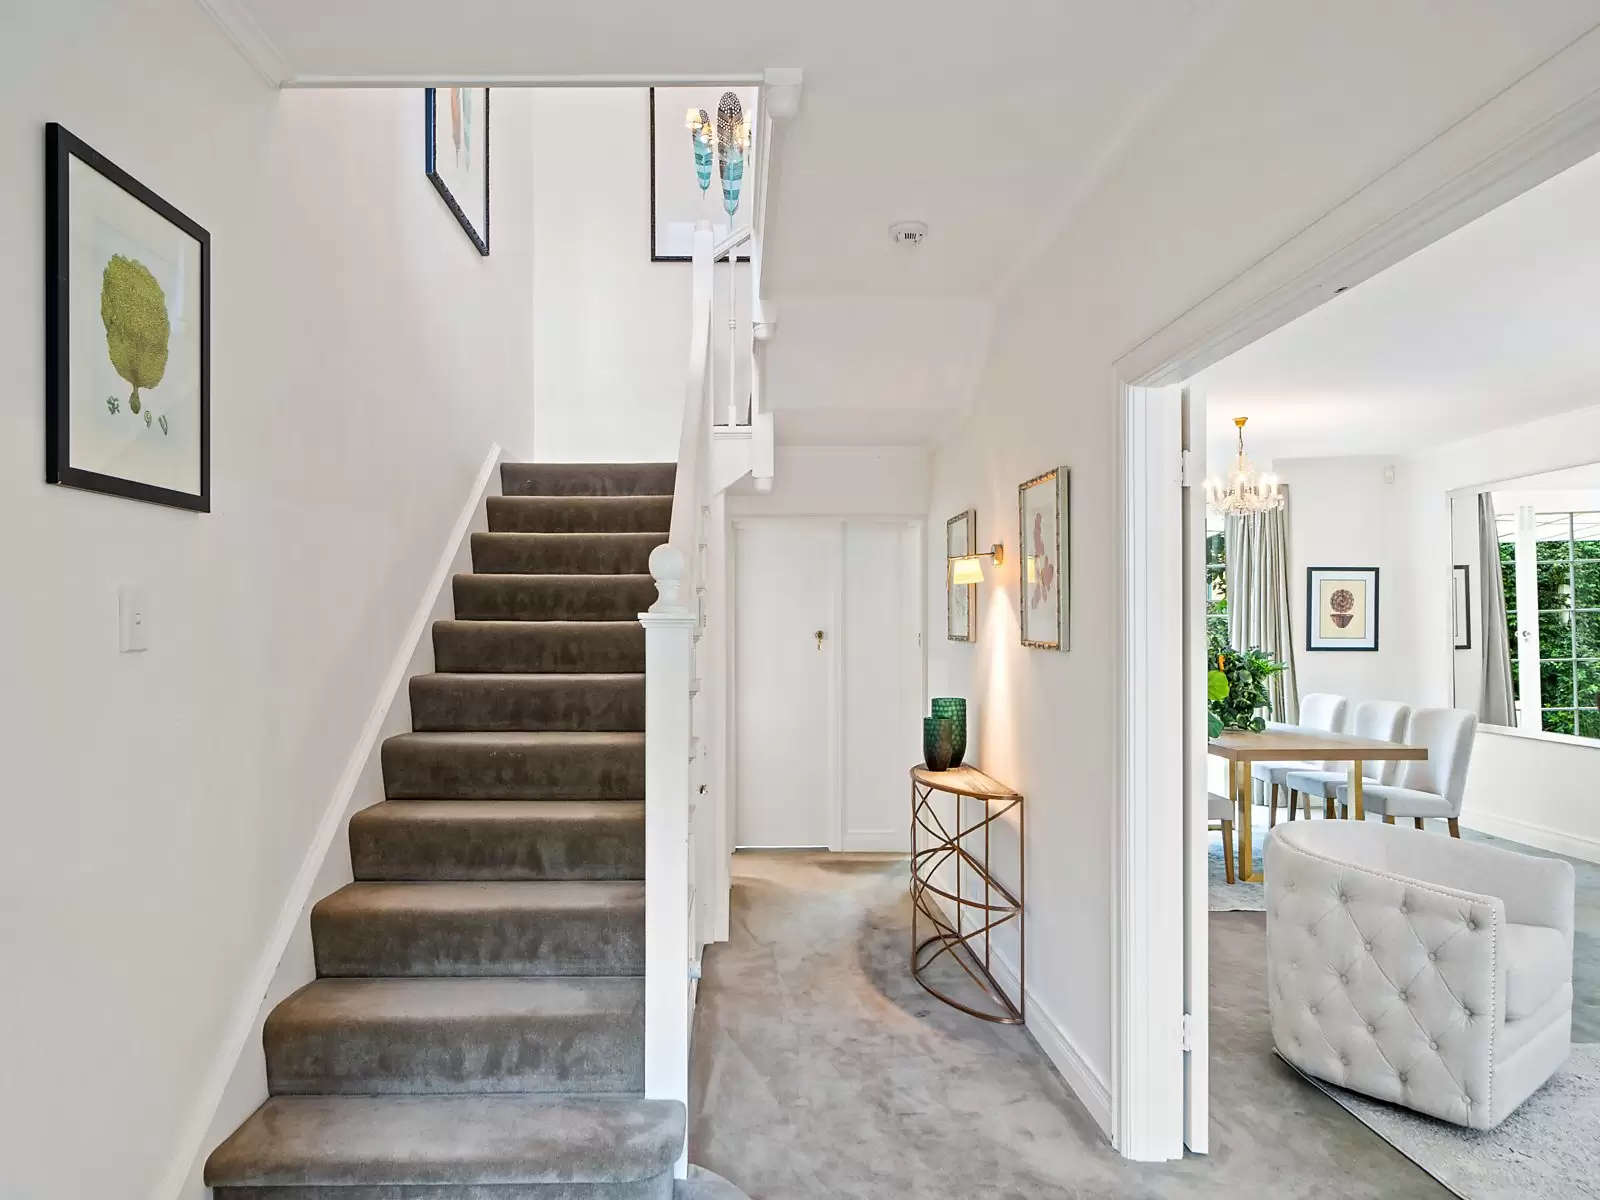 Photo #5: 3/9-11 Rosemont Avenue, Woollahra - For Sale by Sydney Sotheby's International Realty